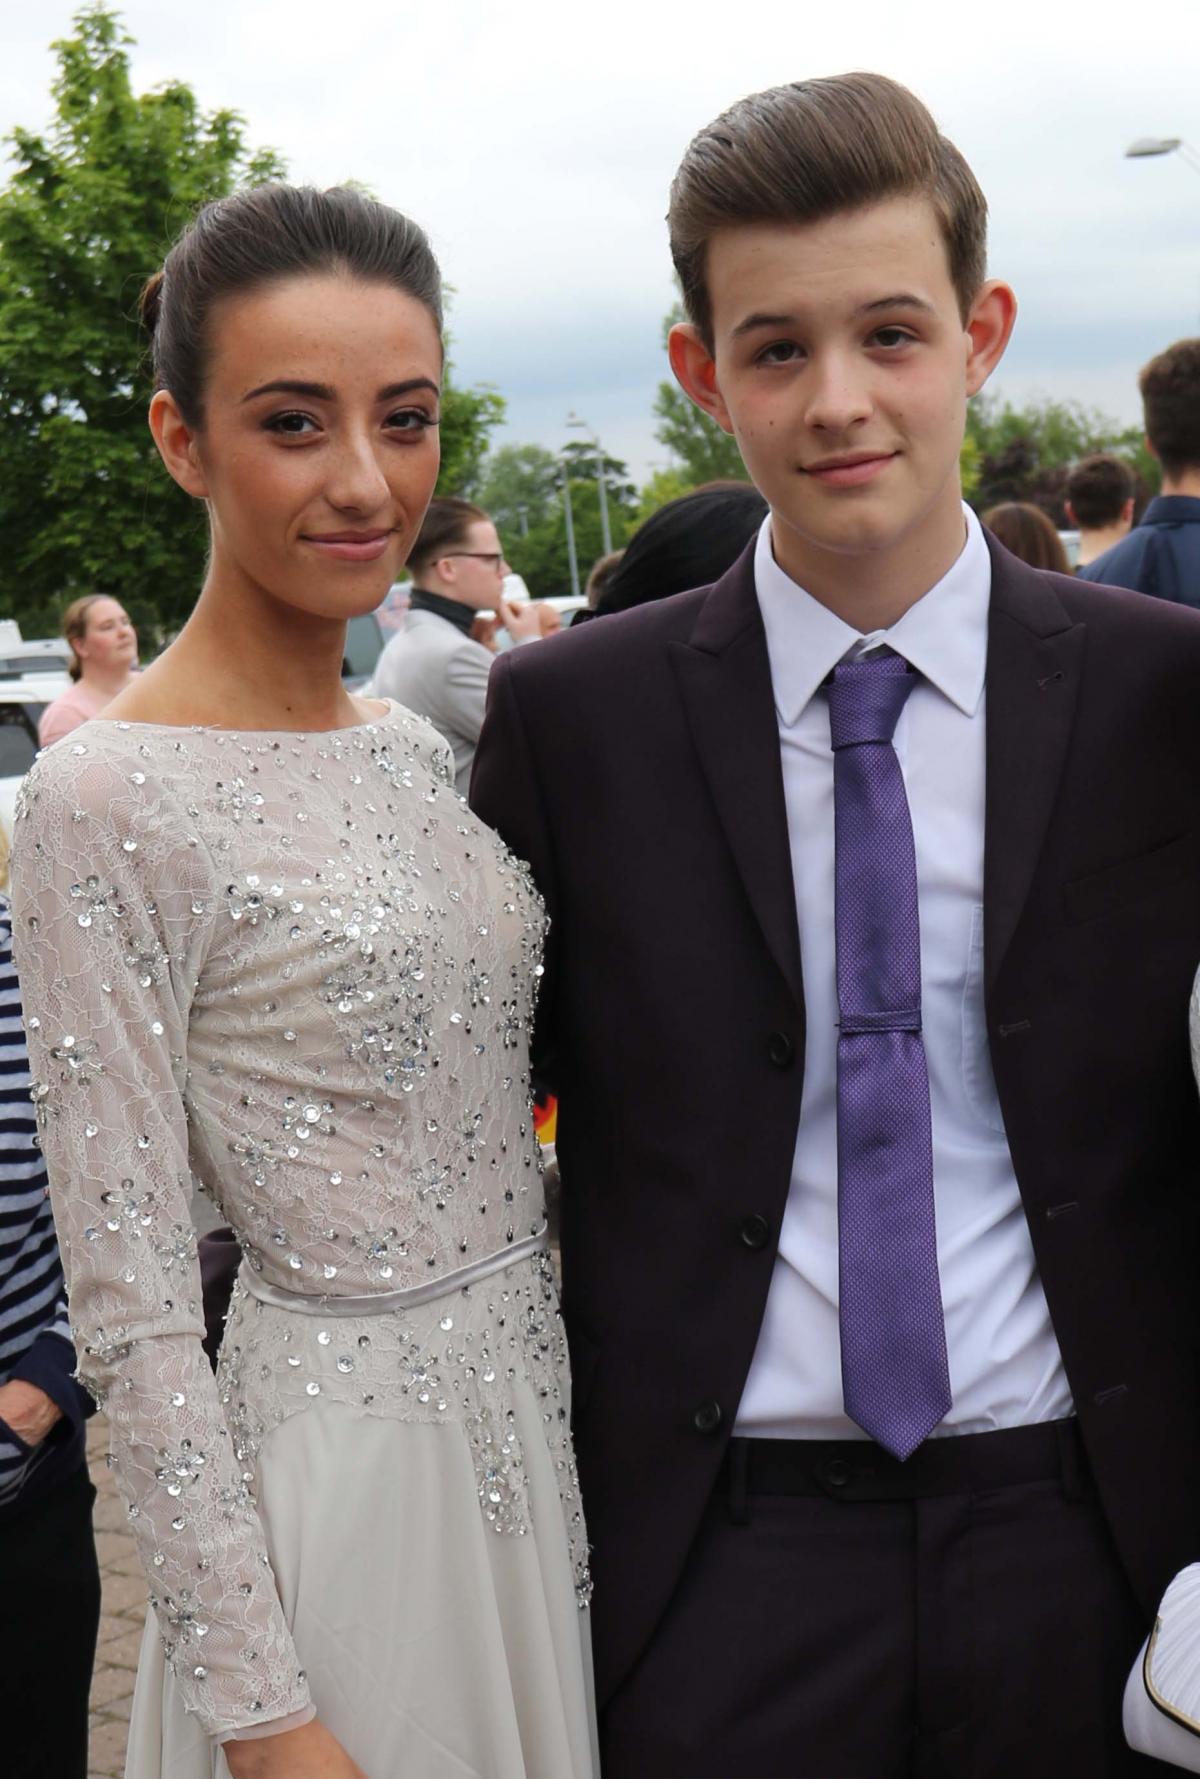 Year 11 Leavers' Ball, King's Academy, Coulby Newham